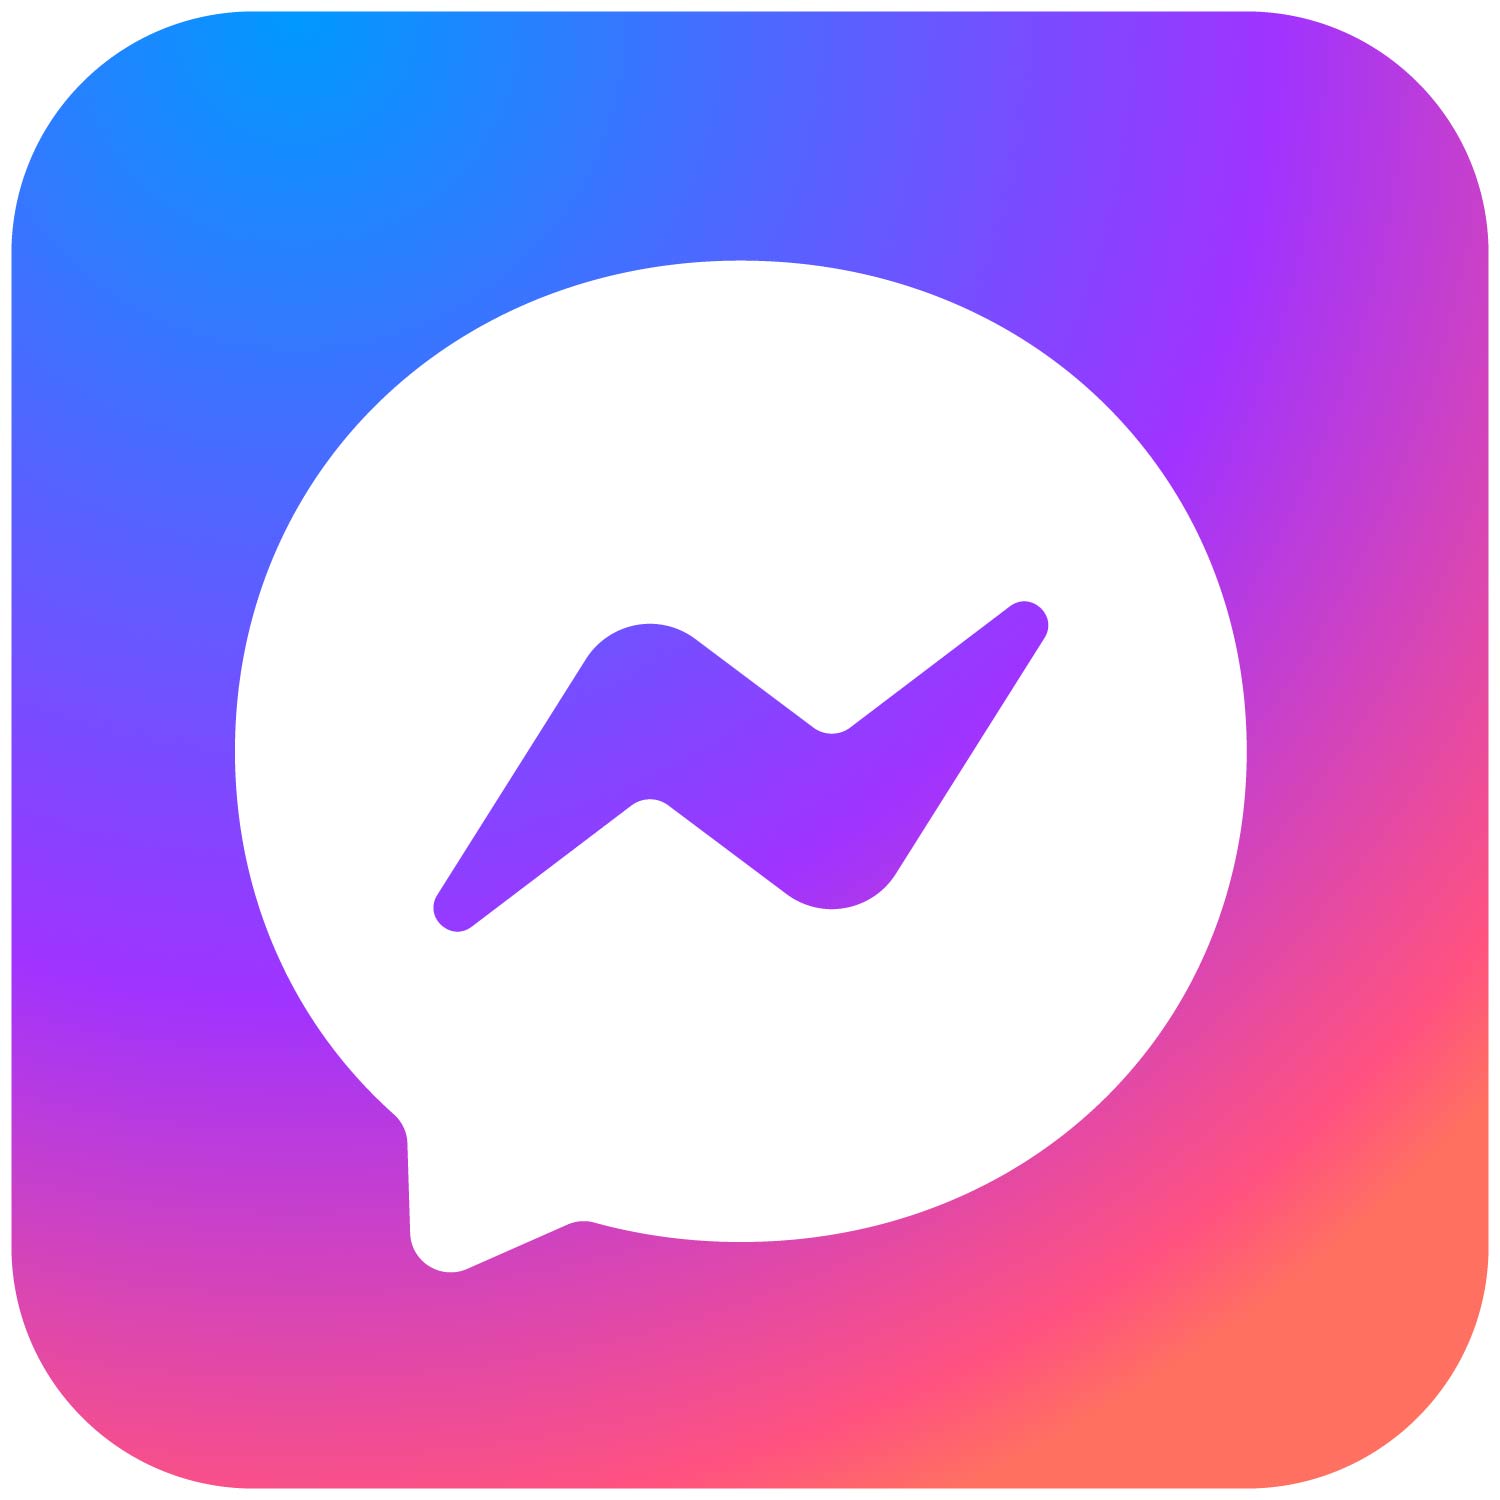 Messenger Rounded Square Icon